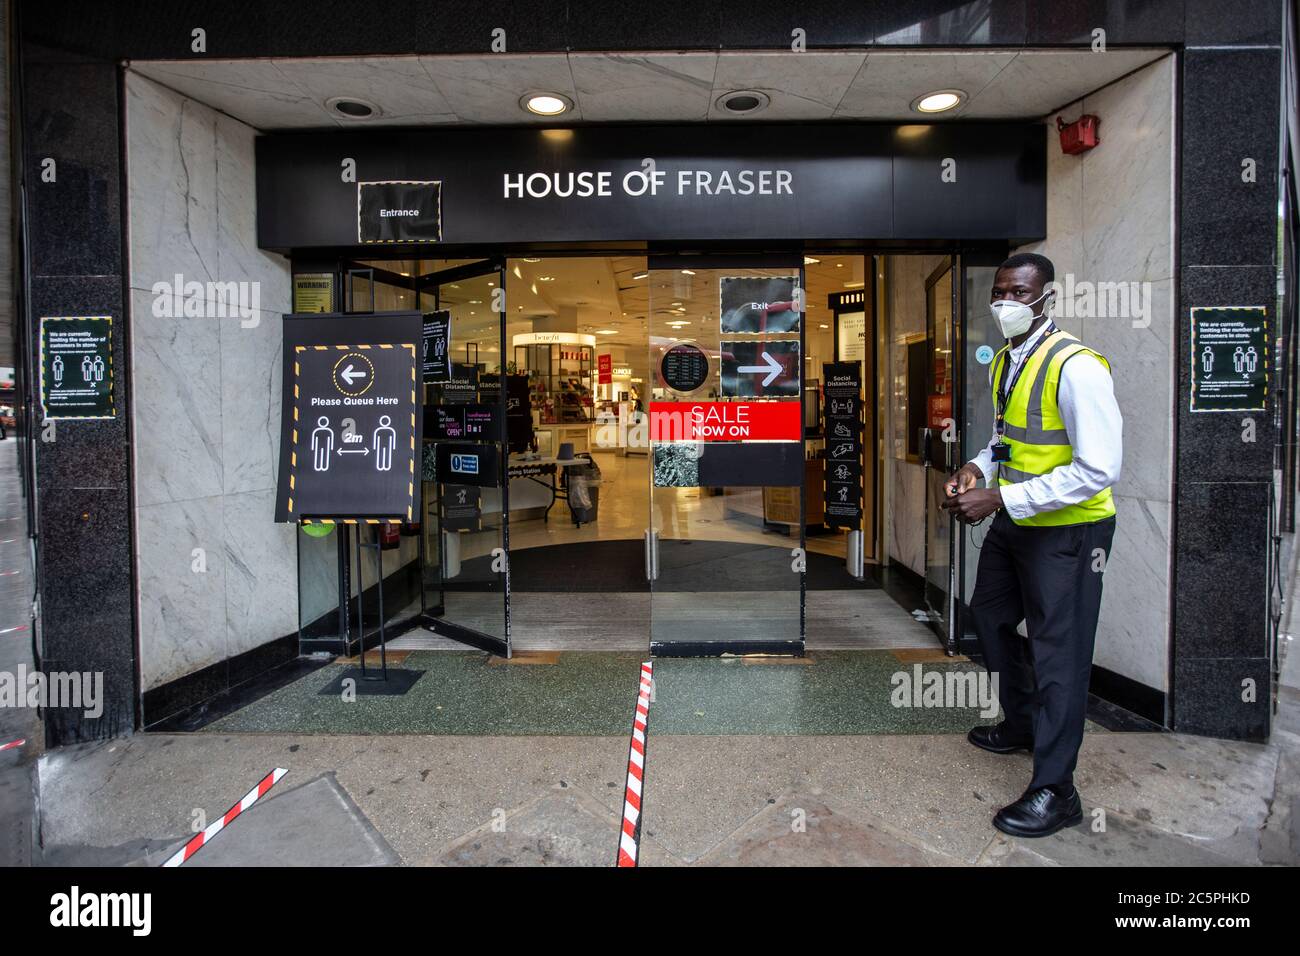 Security wearing a protective face mask directing shoppers into the correct doorway of House of Fraser to maintain social distancing, Kingston, UK Stock Photo